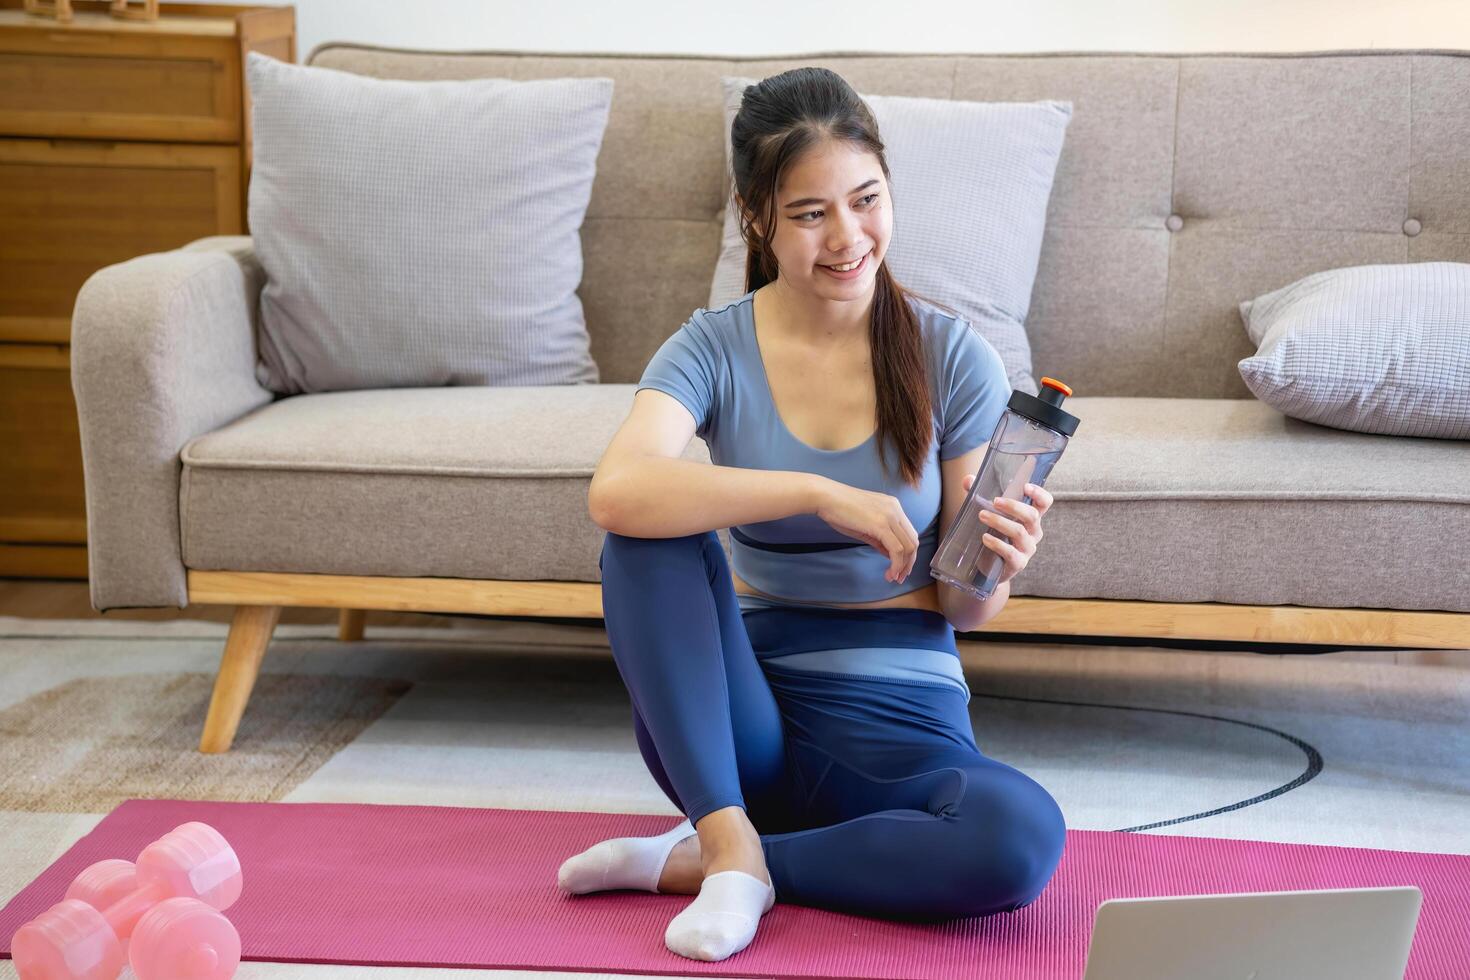 Women are stretching, at home, and fitness Women exercise or do yoga in their bedroom for health and wellness a healthy, calm female person training or working on the house floor. photo